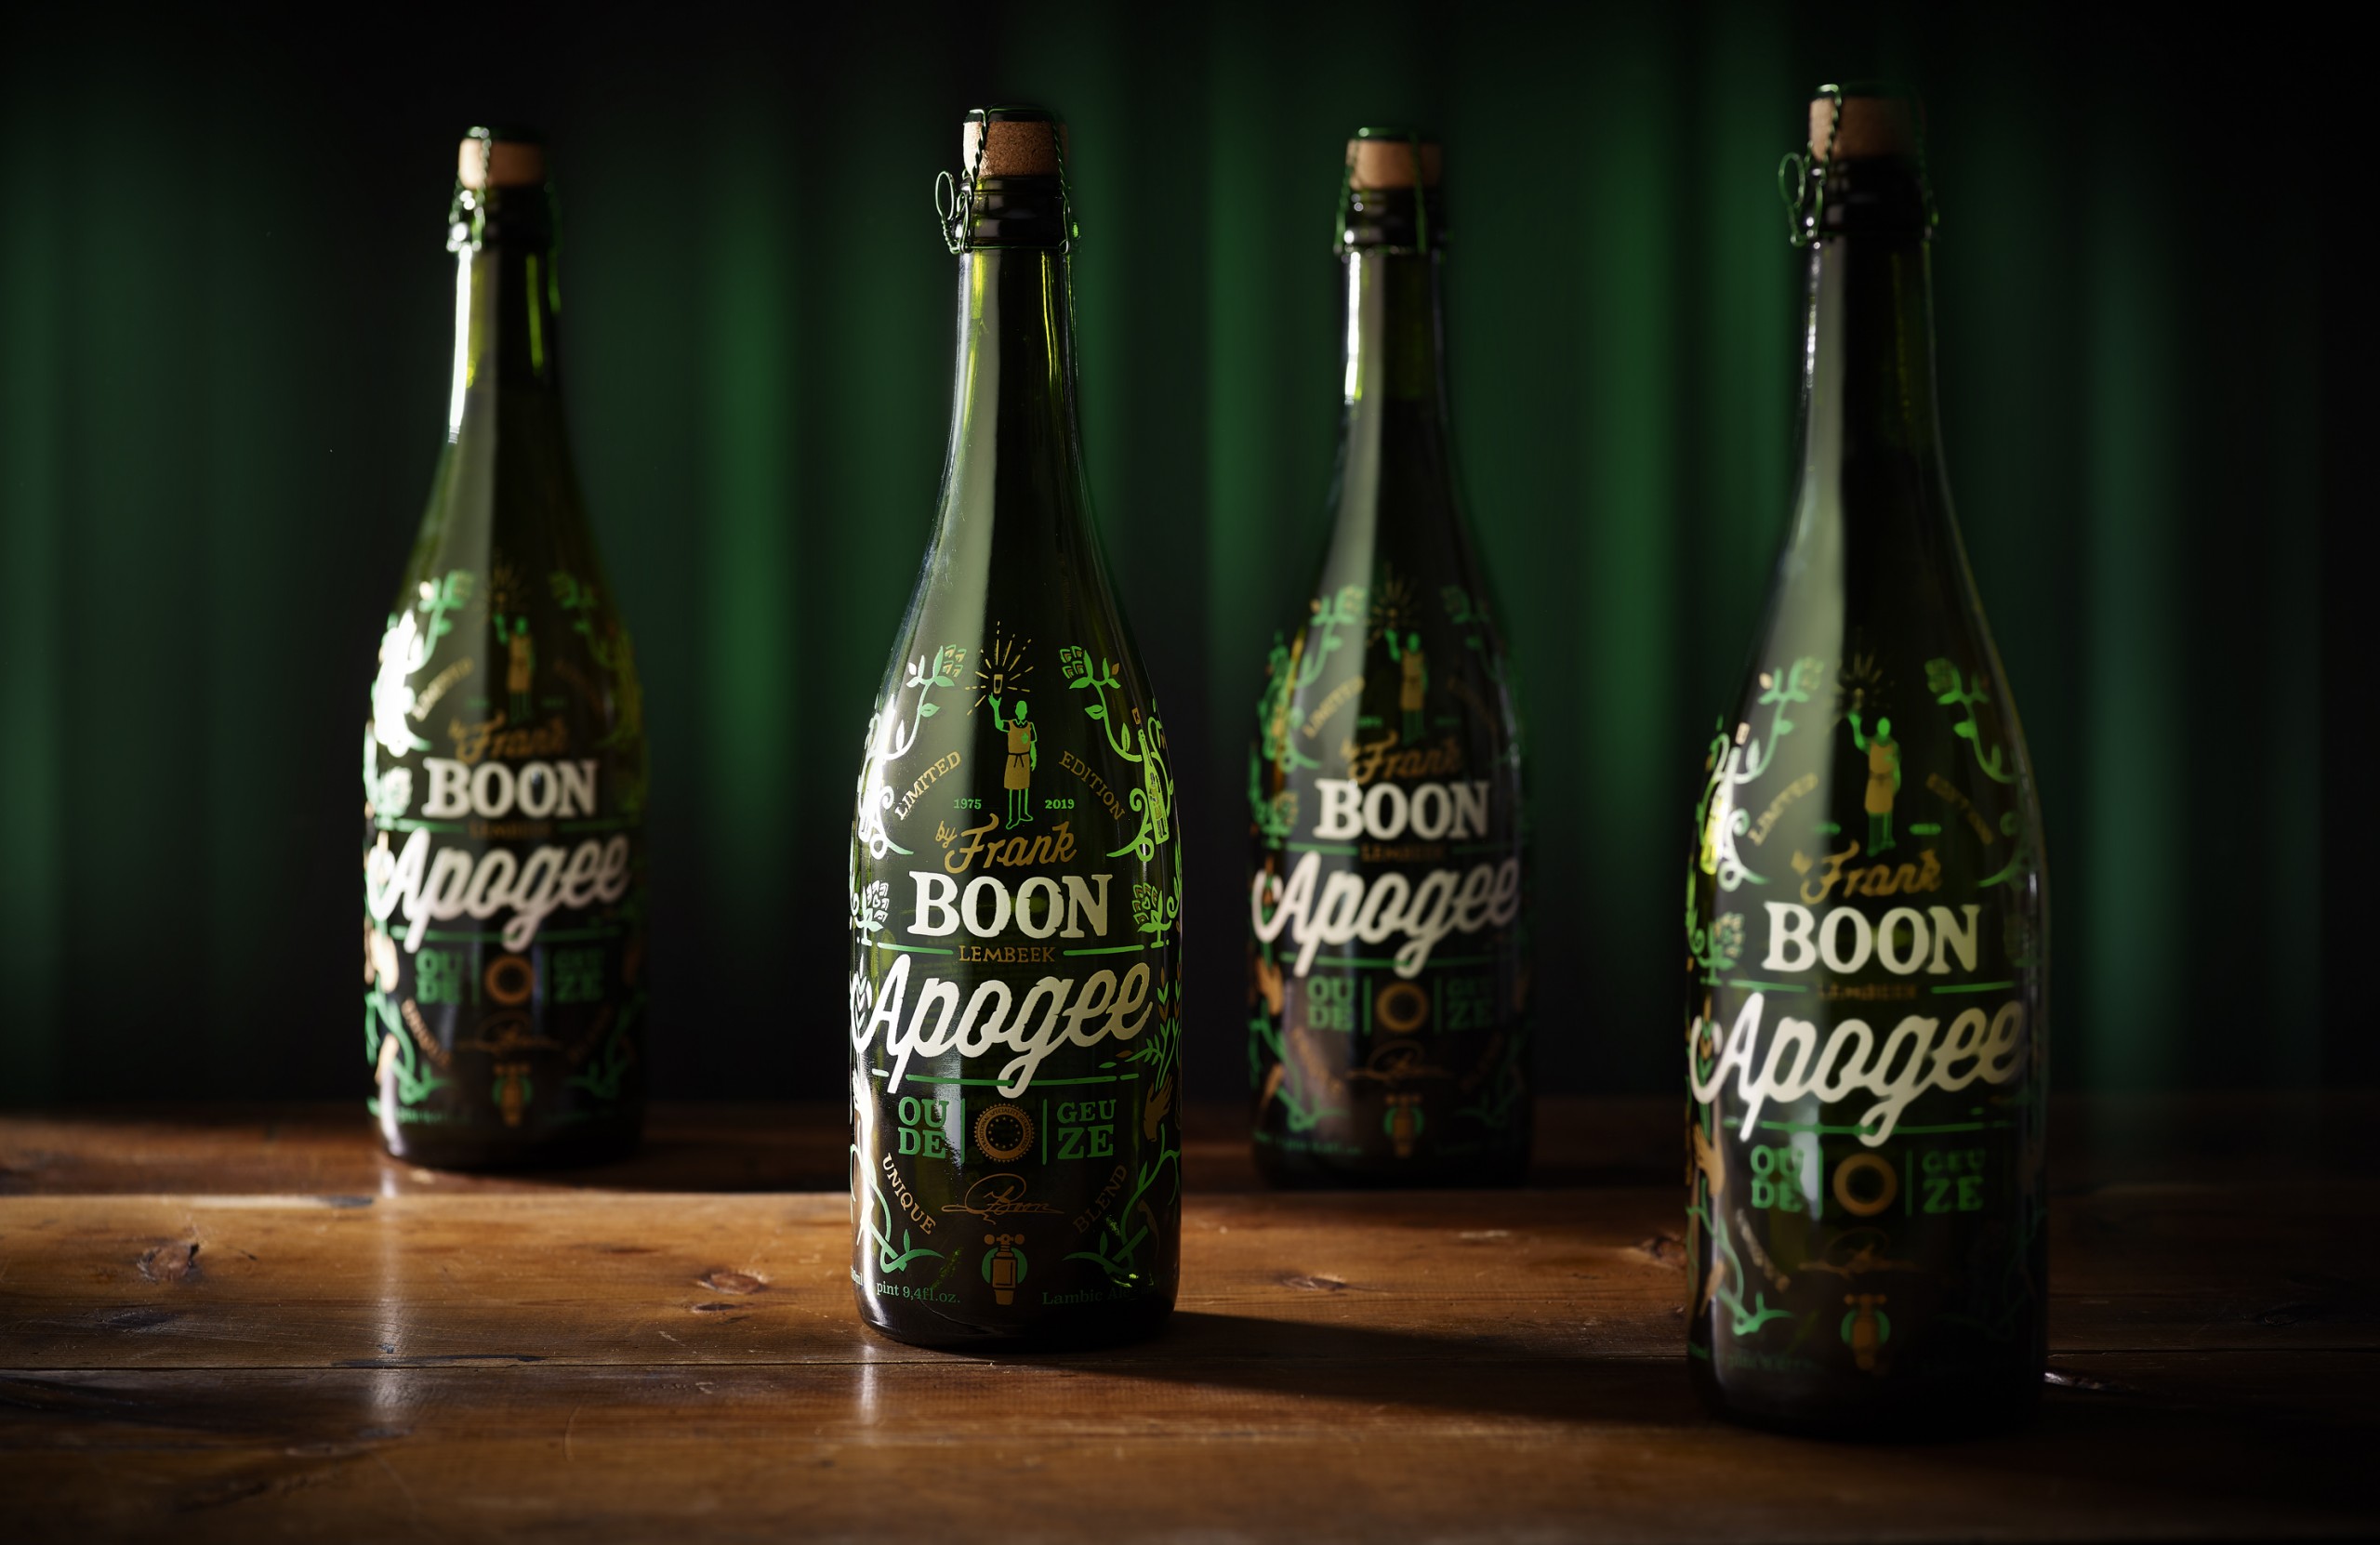 Quatre Mains package design - Package design boon, brouwerij, frank boon, 